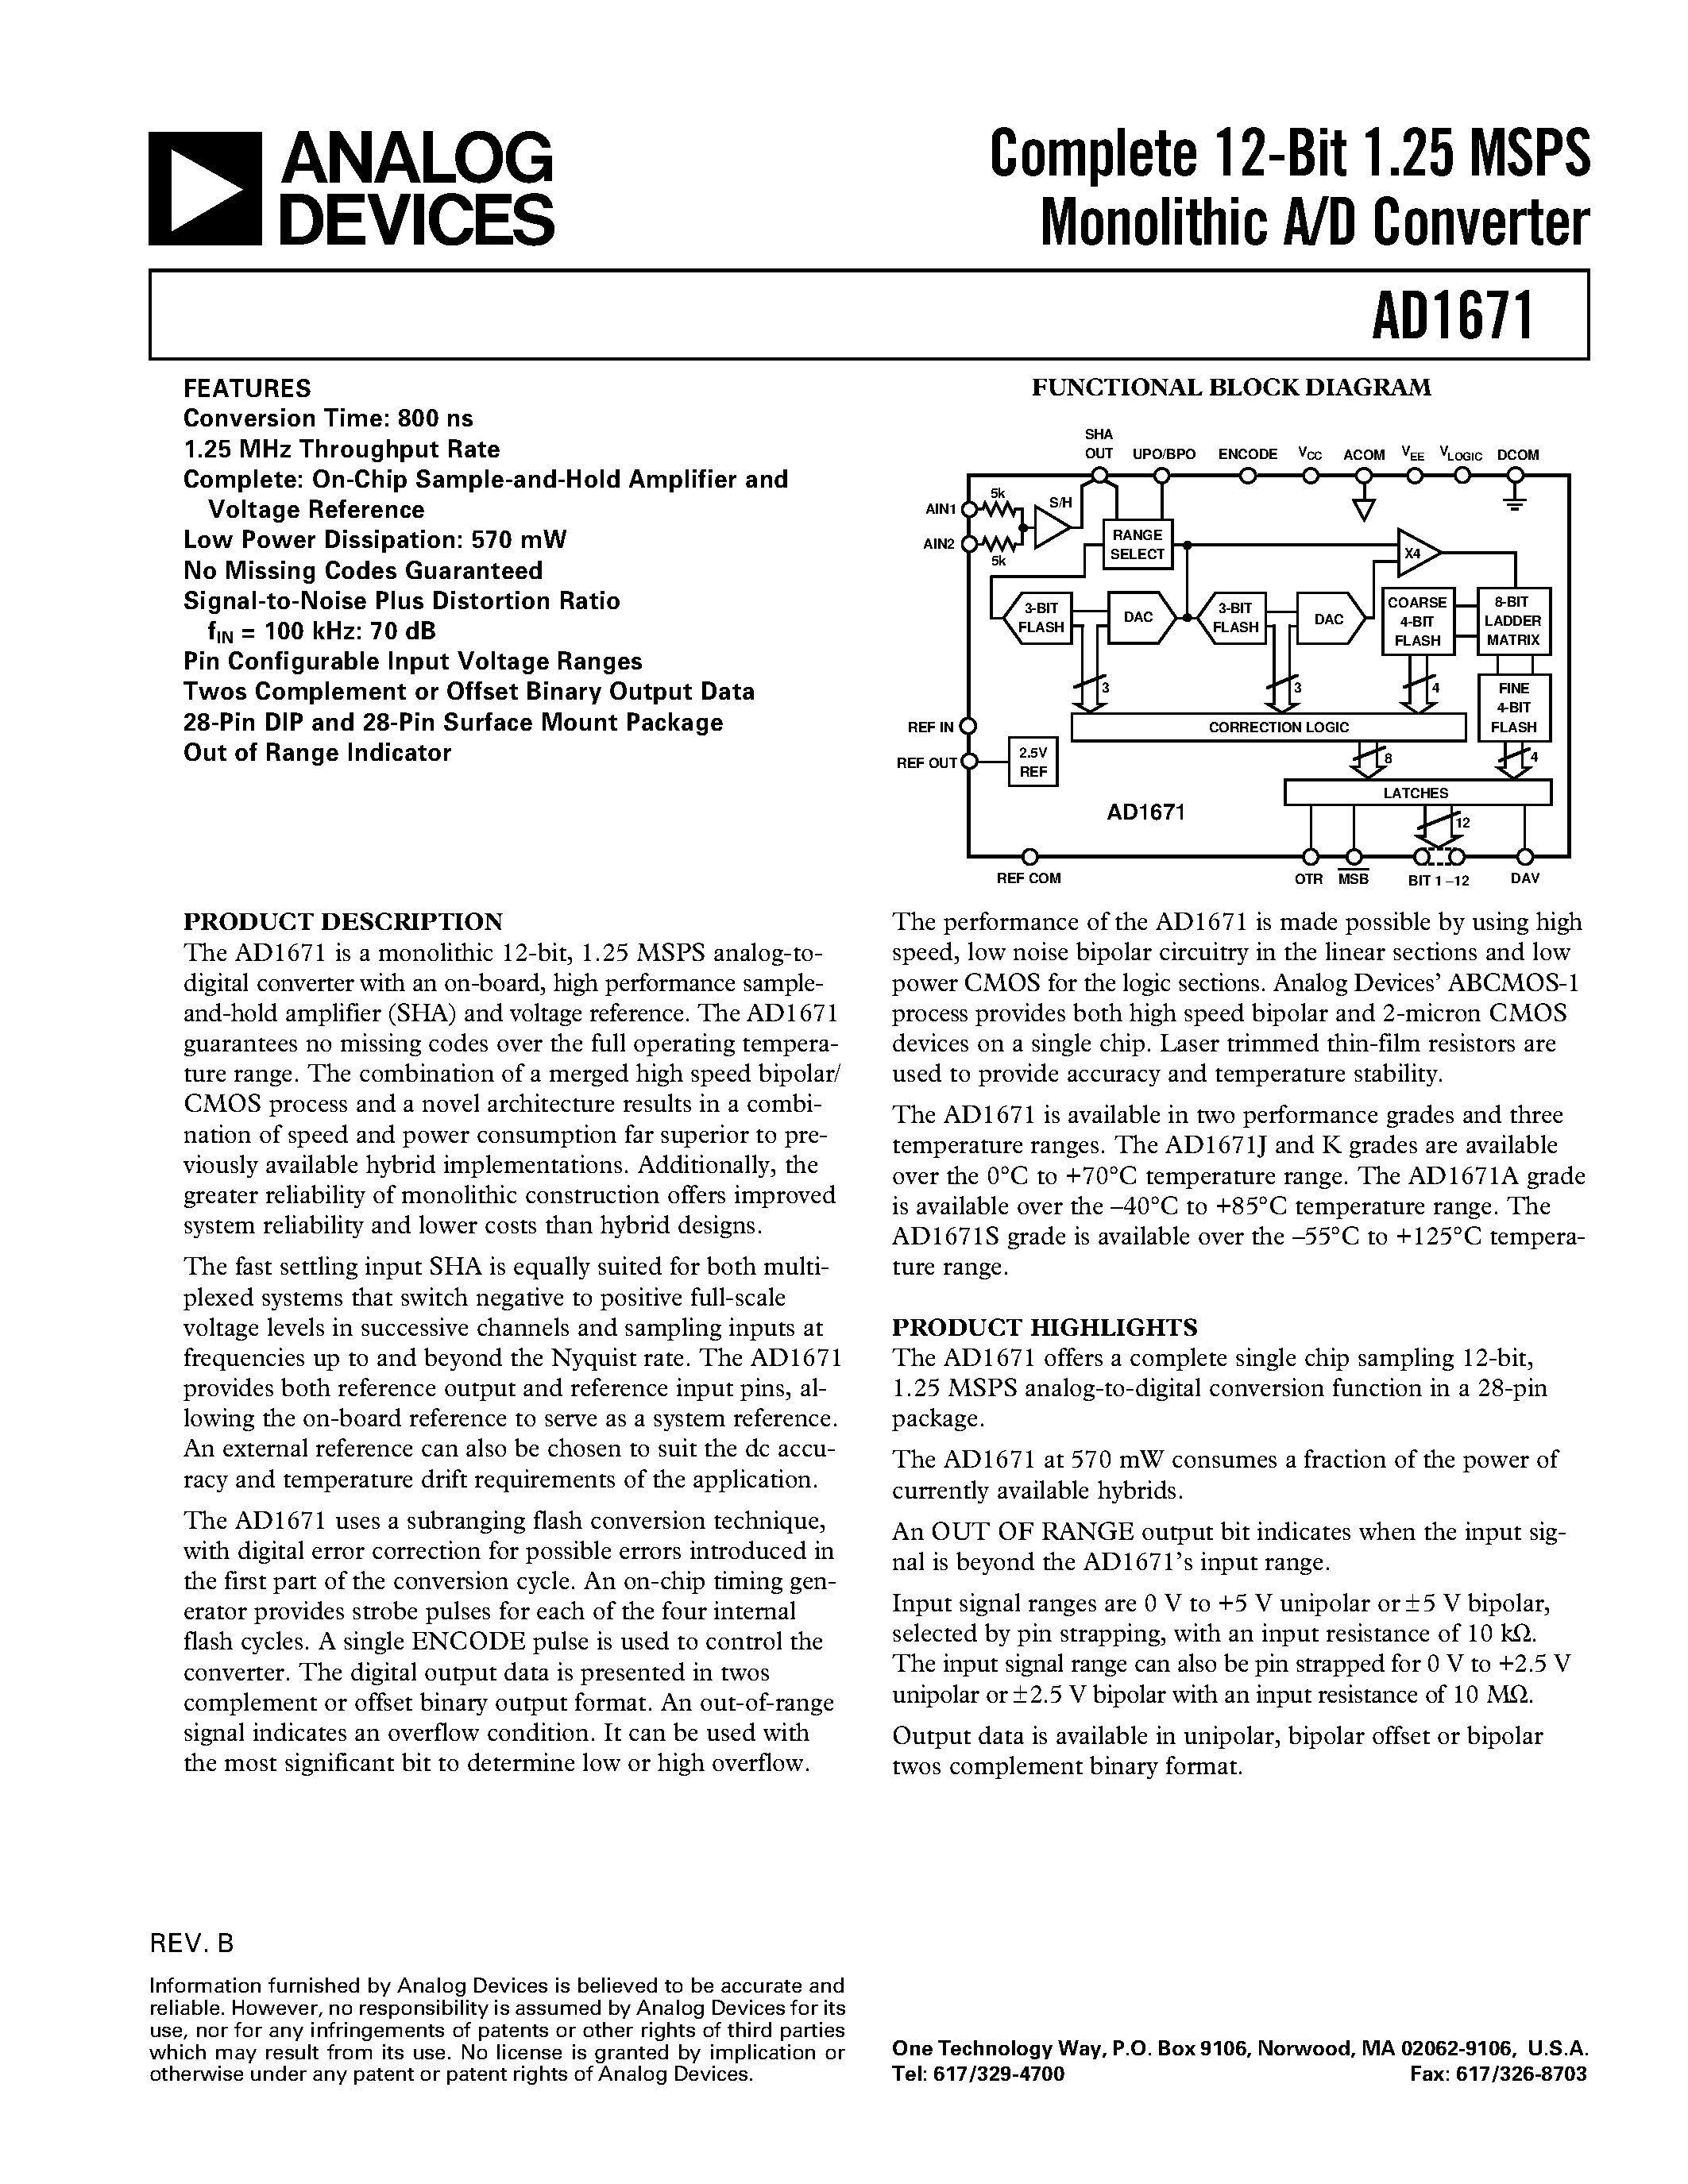 Datasheet AD1671SQ - Complete 12-Bit 1.25 MSPS Monolithic A/D Converter page 1